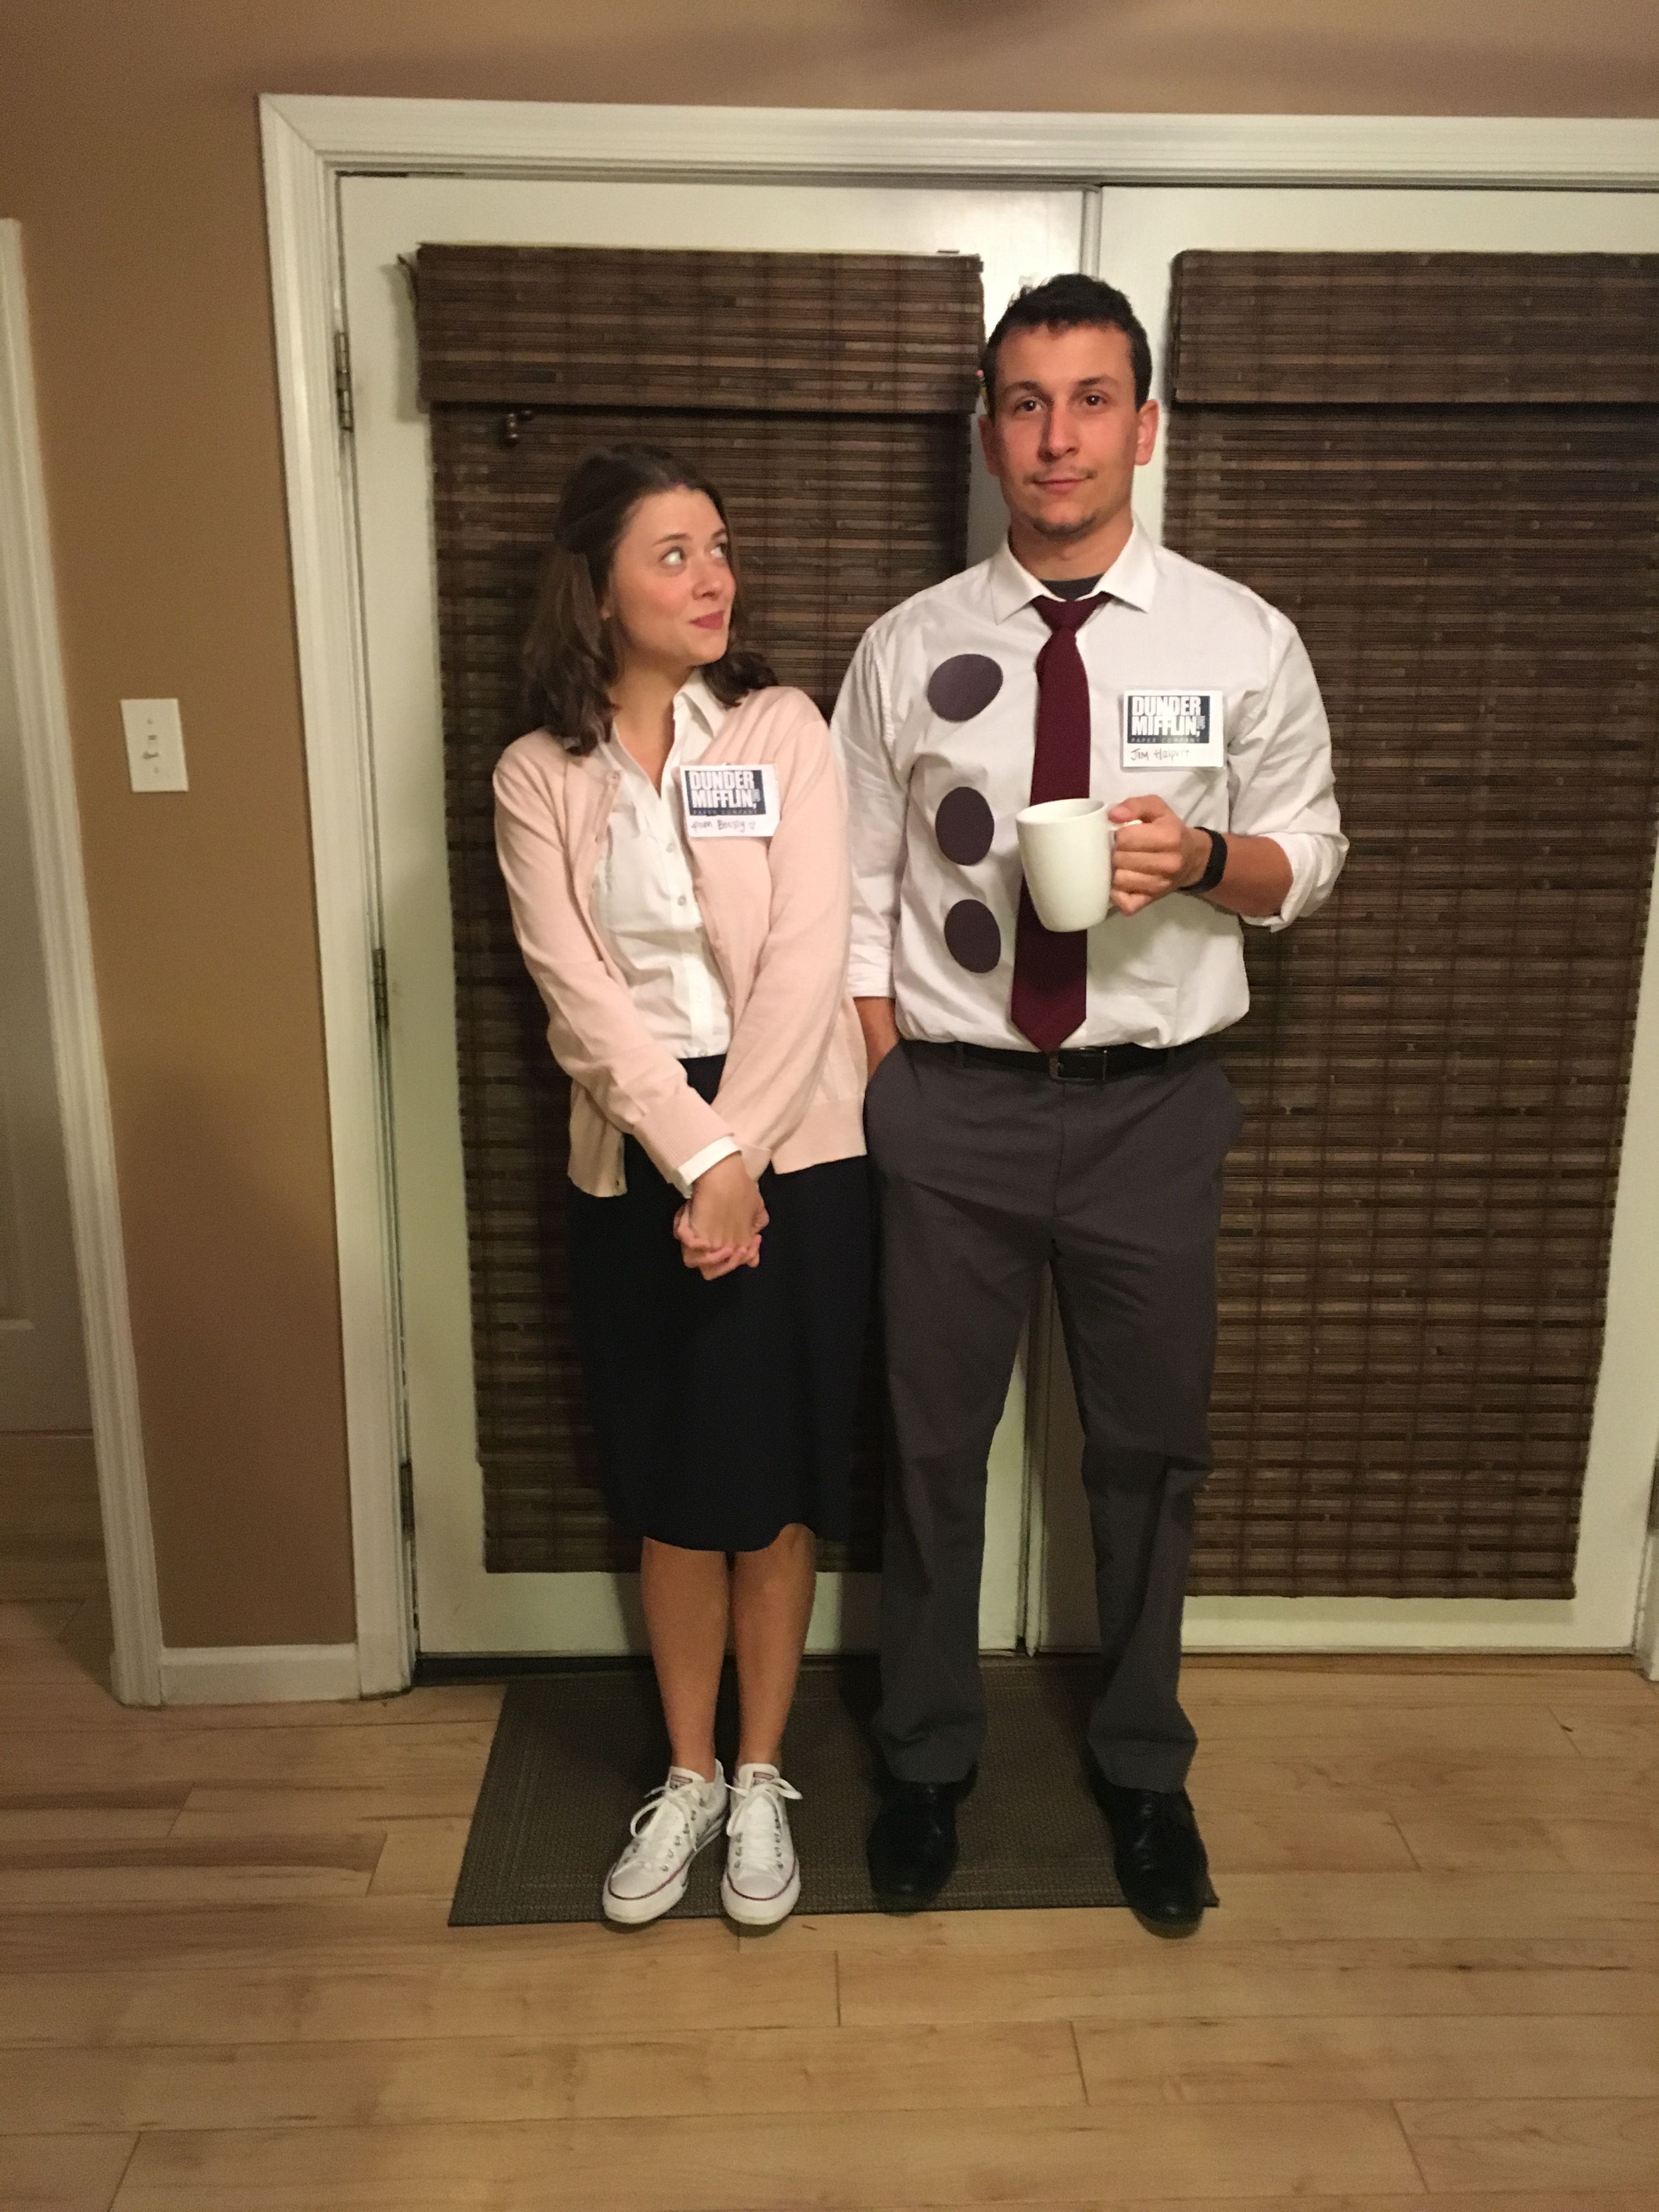 Halloween Costumes Ideas For The Office